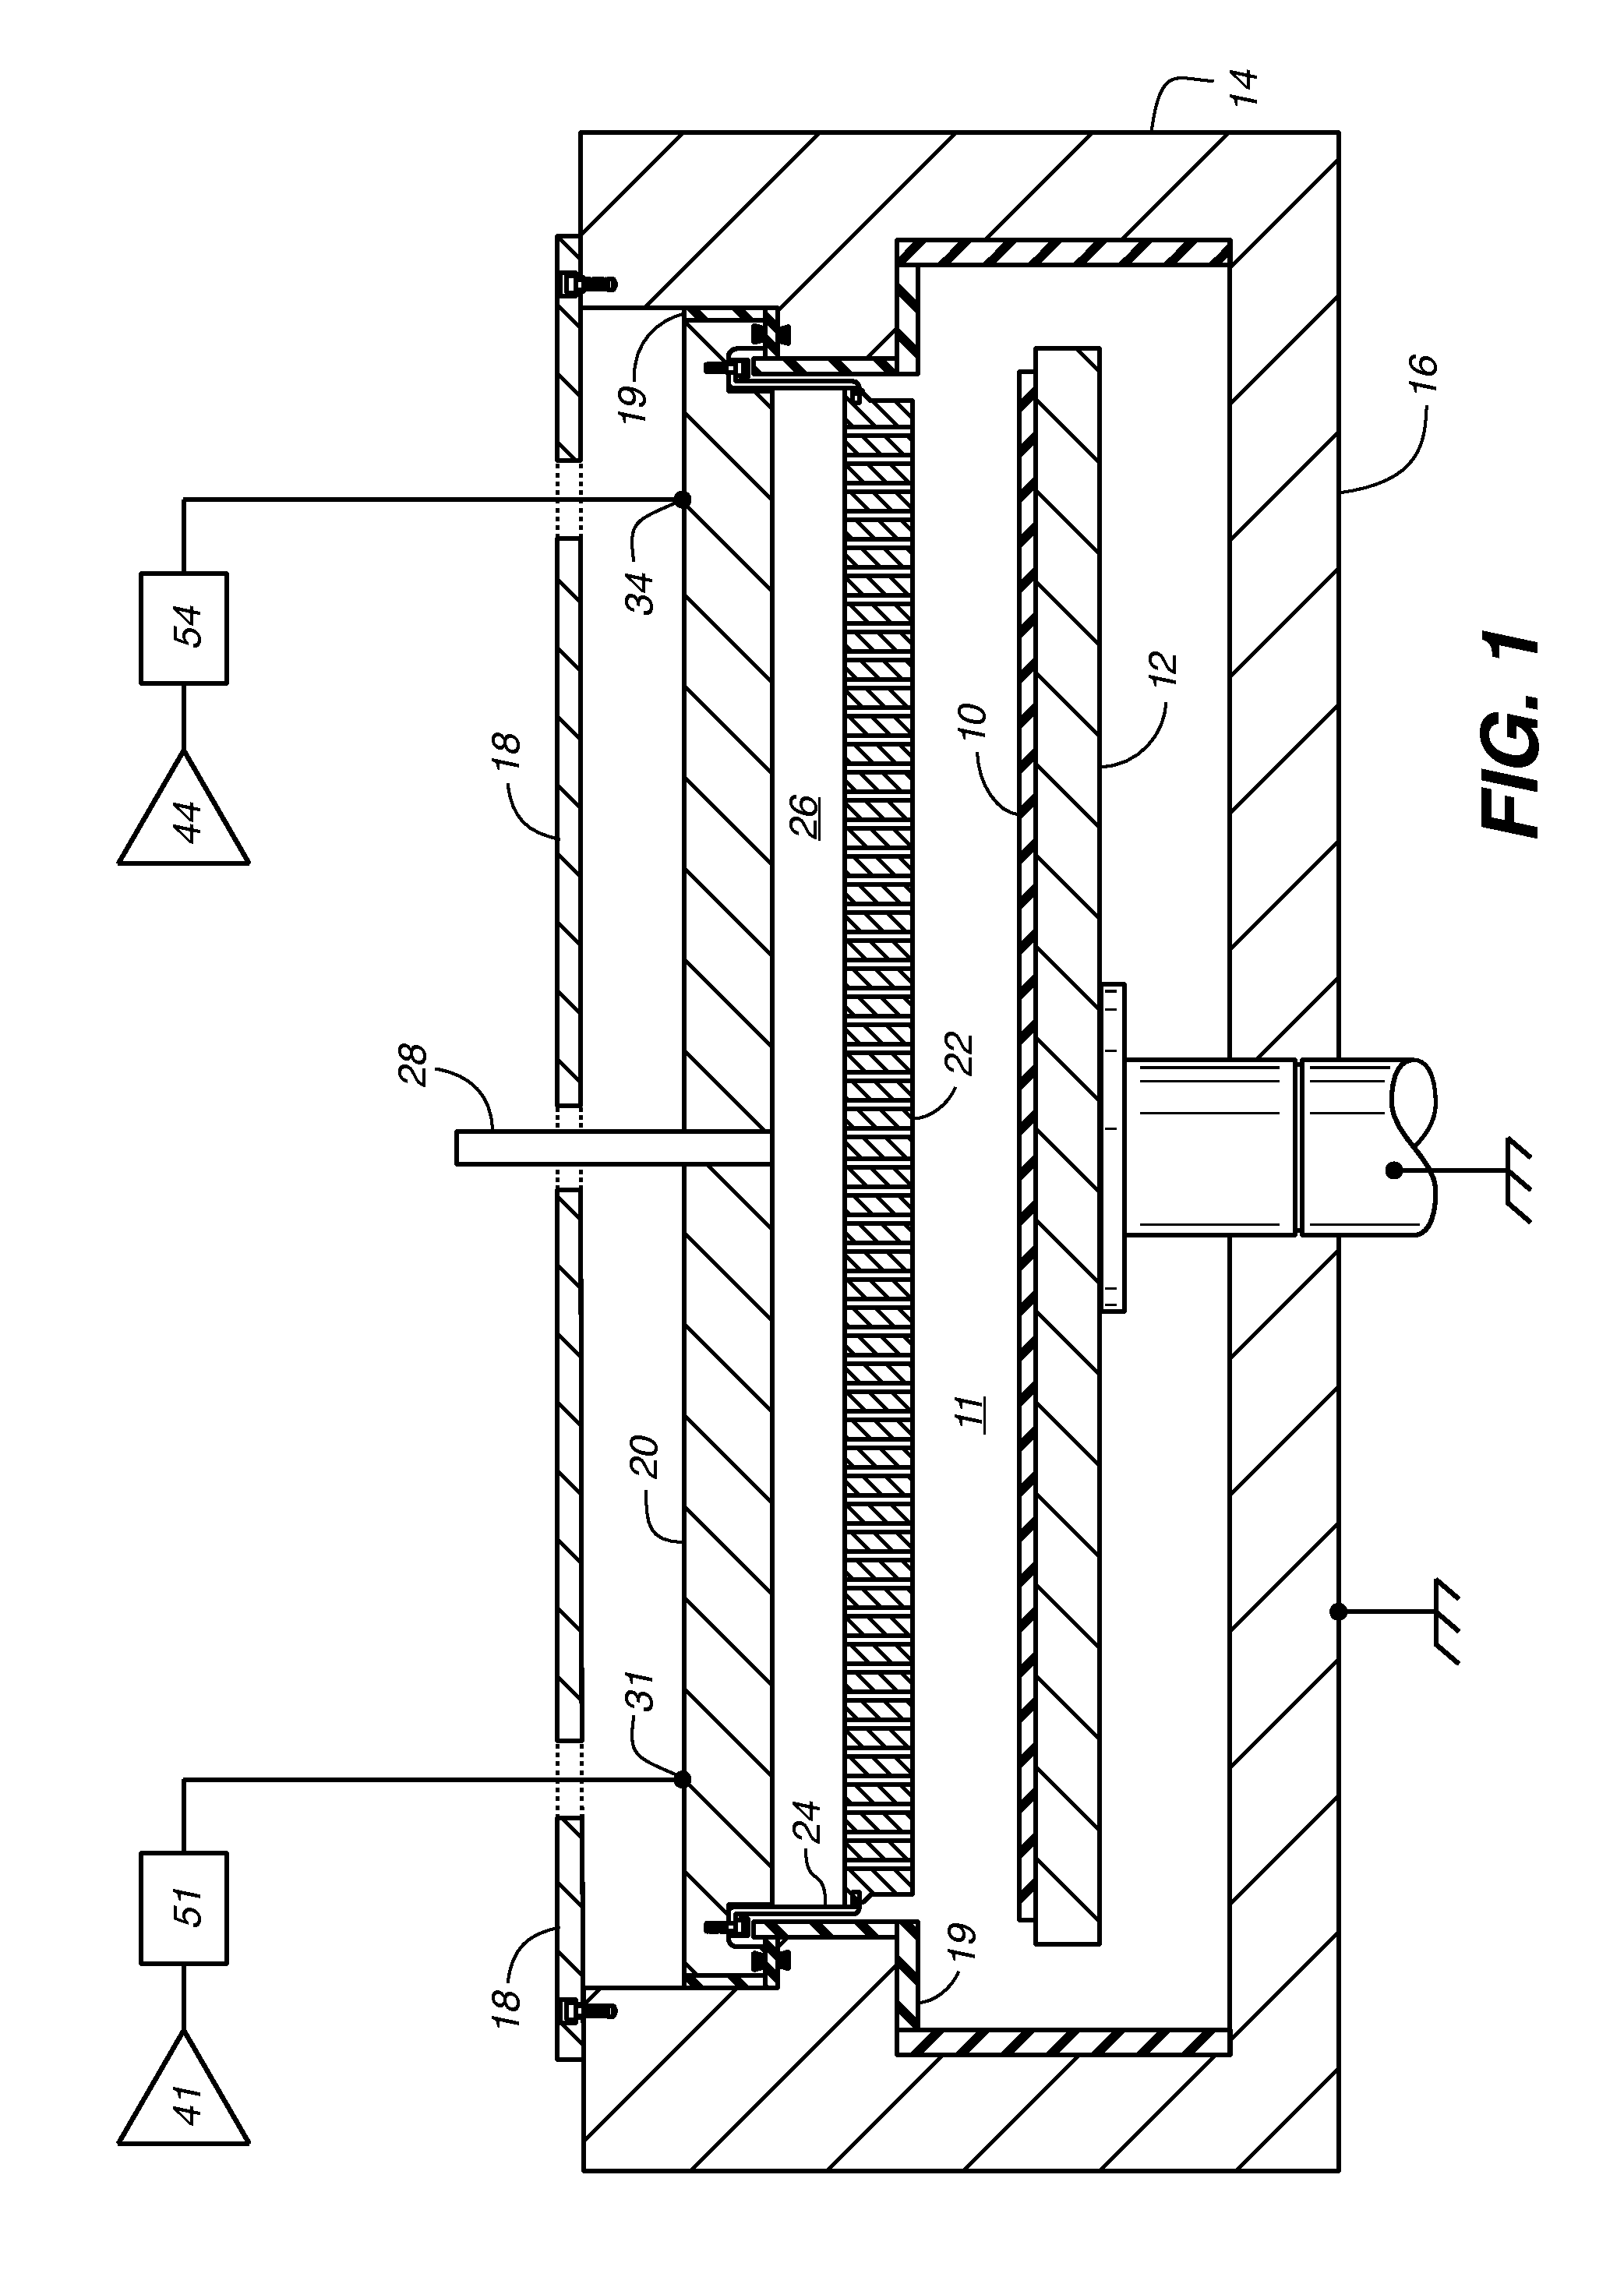 Phase-Modulated RF Power for Plasma Chamber Electrode